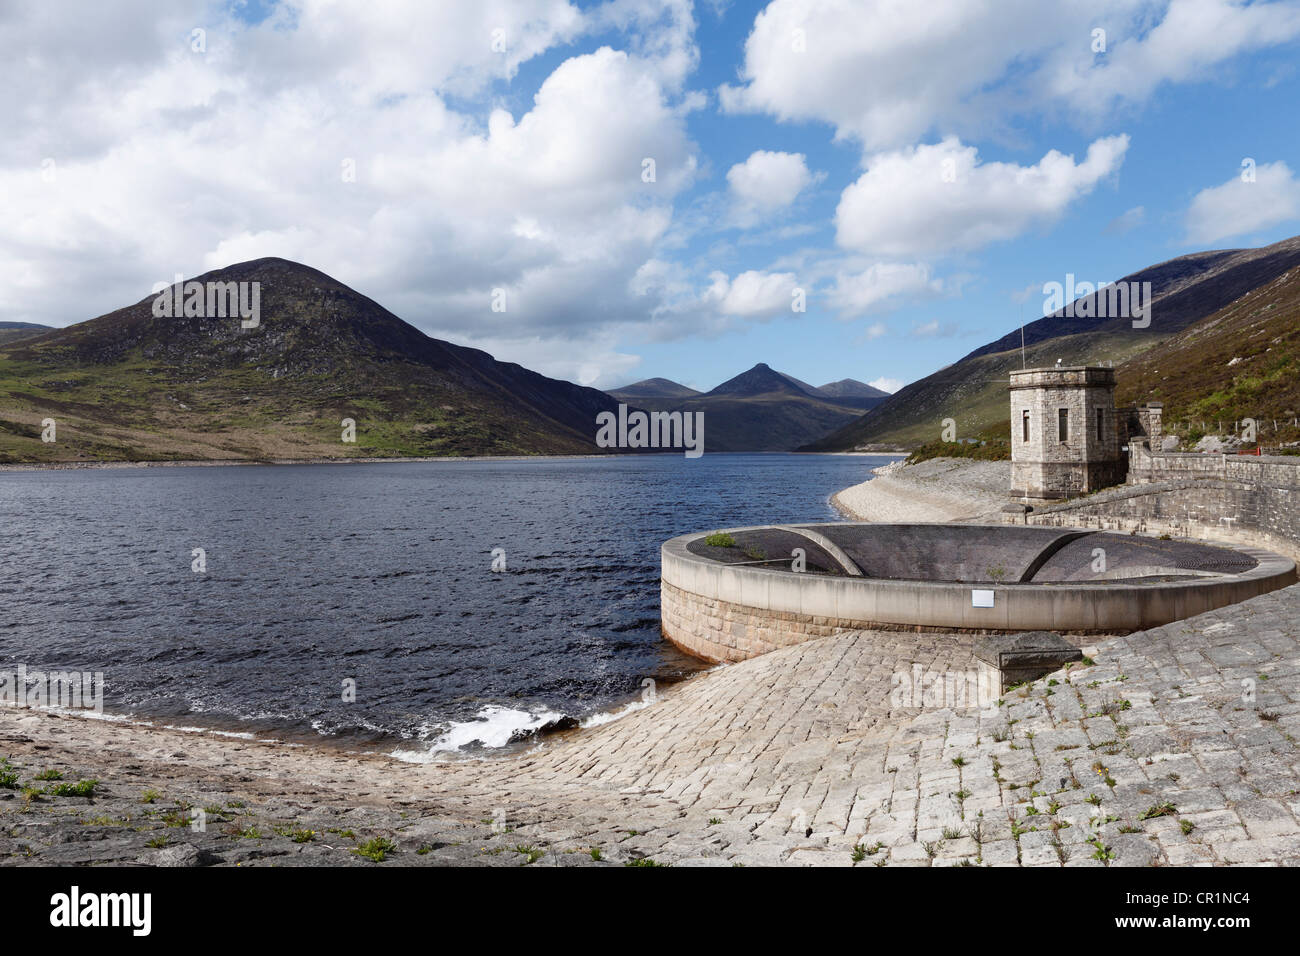 Silent Valley Reservoir, Mourne Mountains, County Down, Northern Ireland, Ireland, Great Britain, Europe Stock Photo